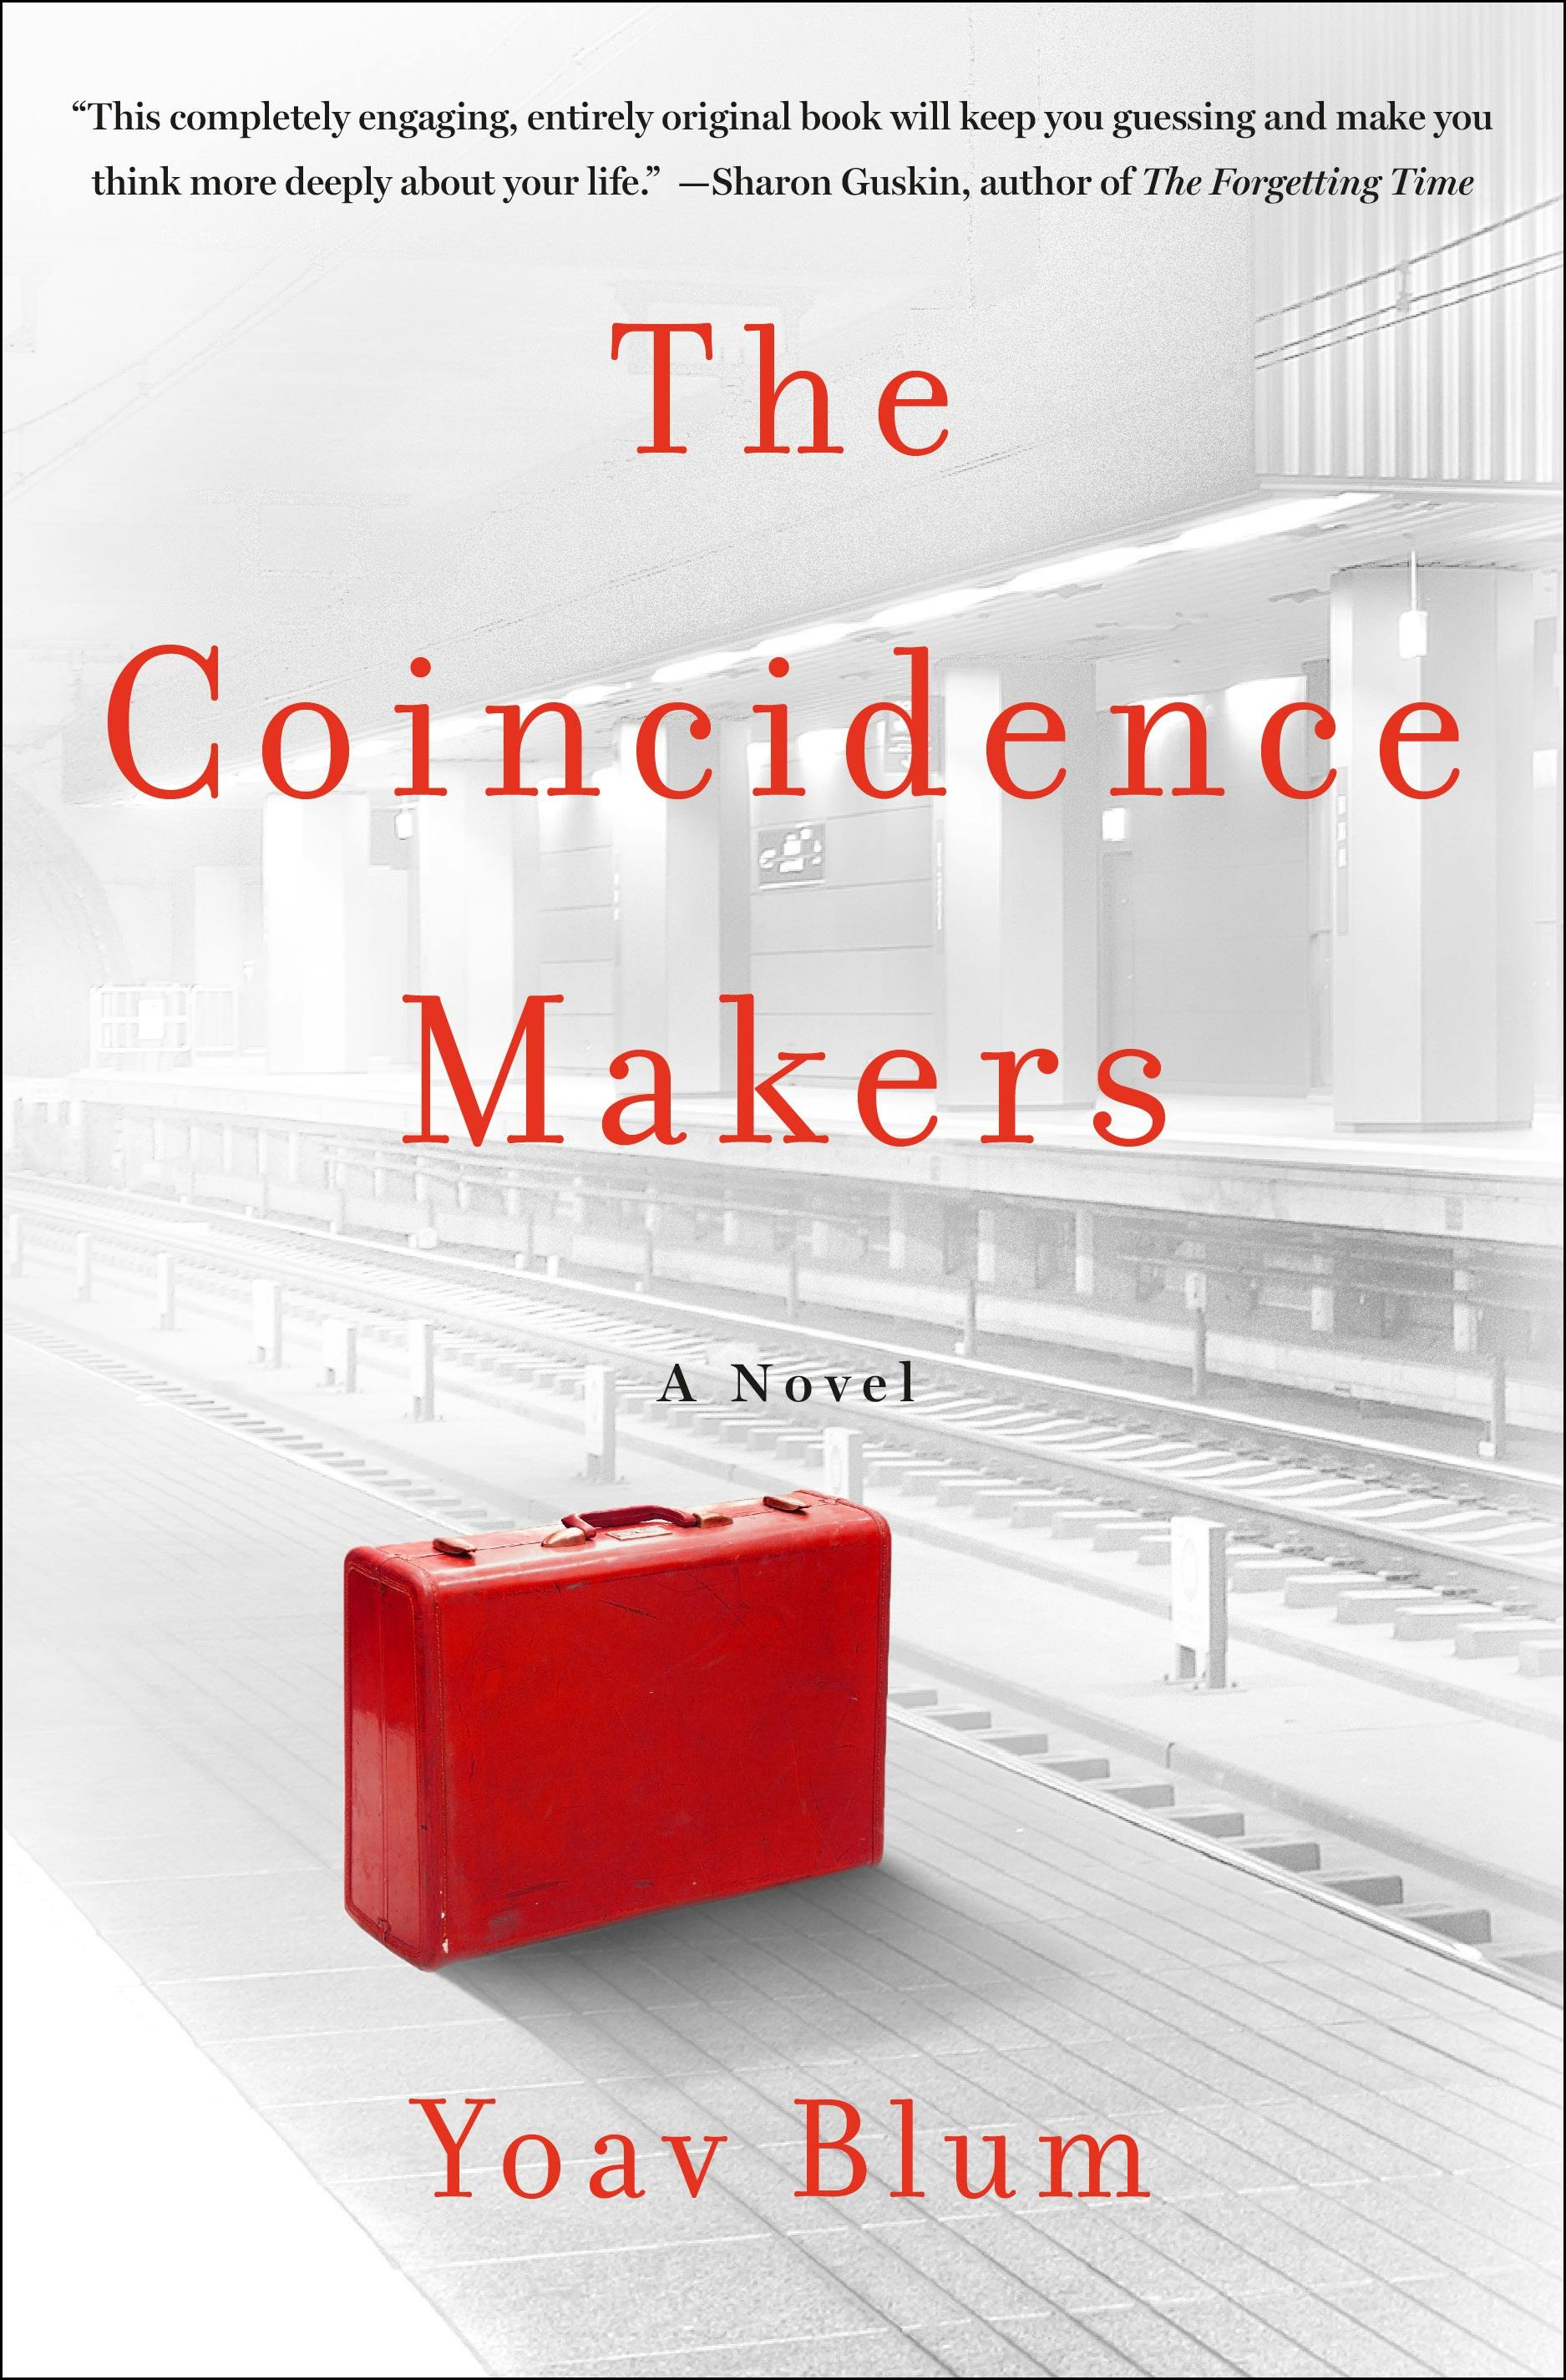 The Coincidence Makers